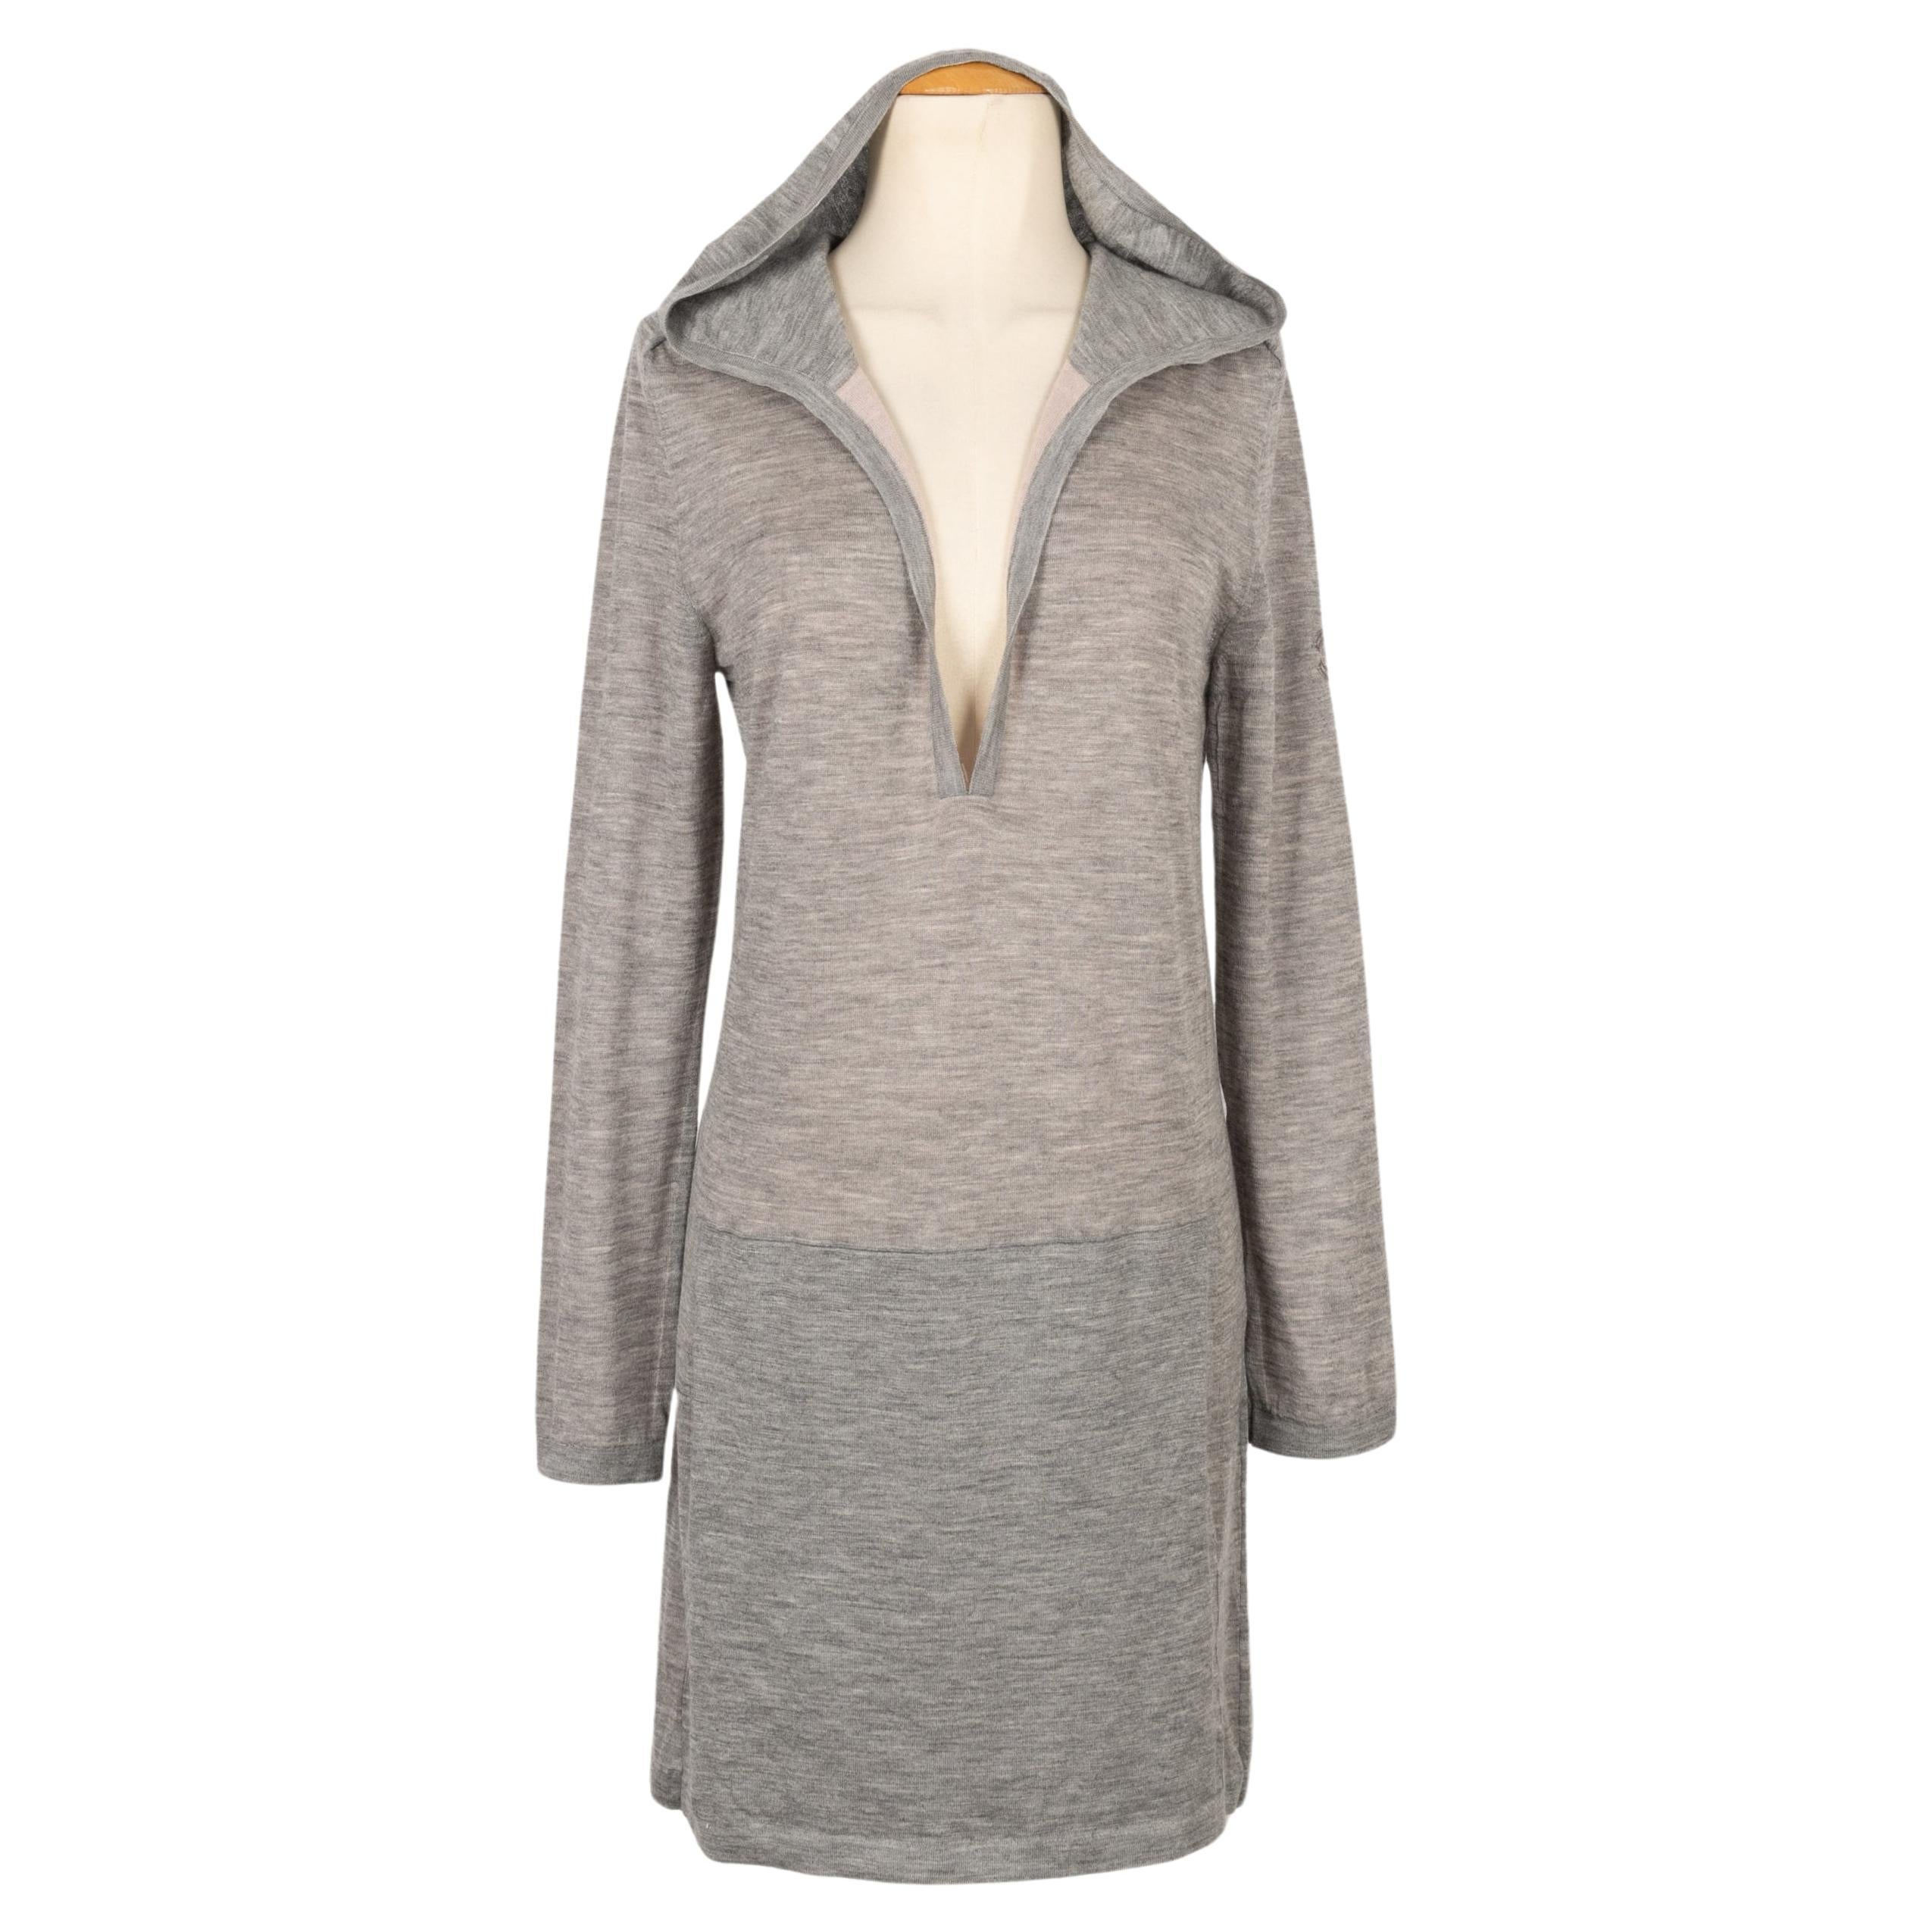 Chanel Grey Cashmere Hooded Pullover Dress For Sale